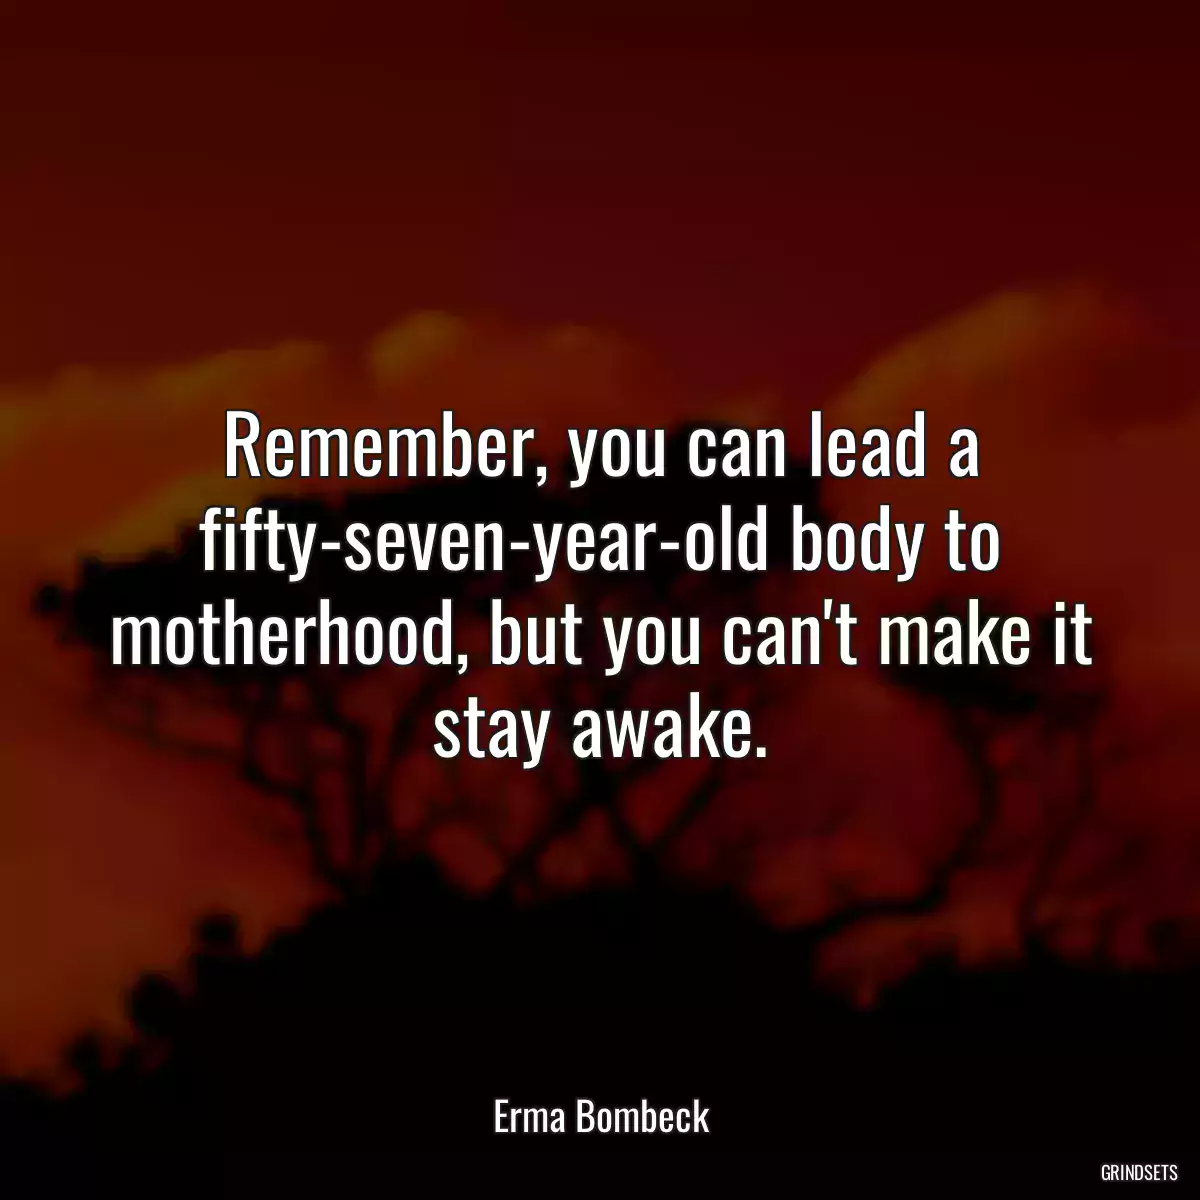 Remember, you can lead a fifty-seven-year-old body to motherhood, but you can\'t make it stay awake.